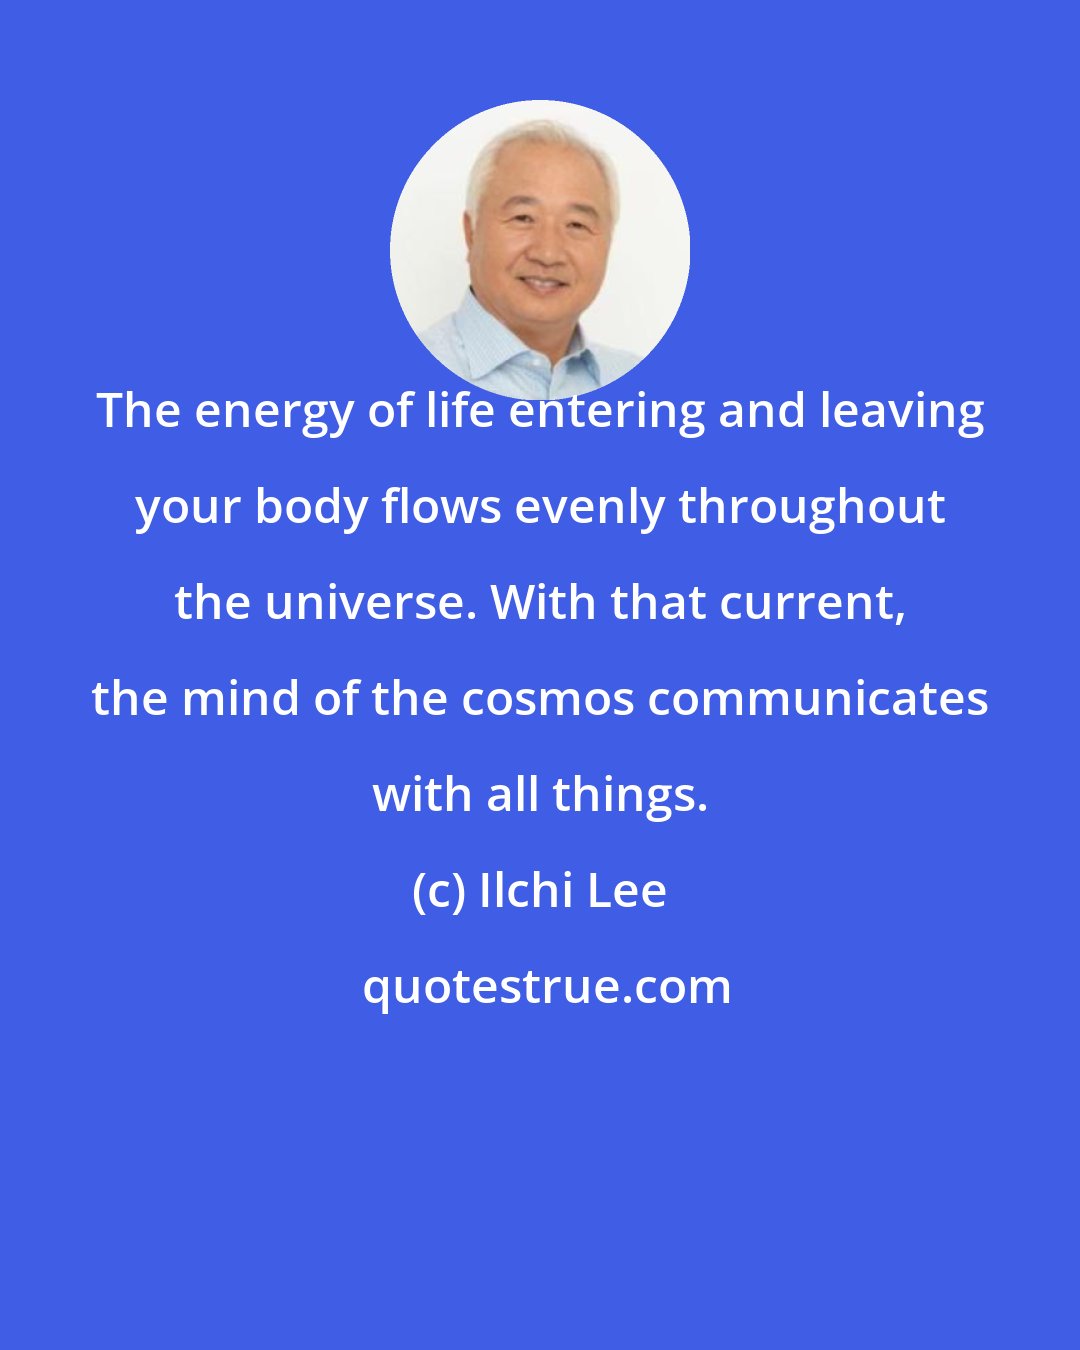 Ilchi Lee: The energy of life entering and leaving your body flows evenly throughout the universe. With that current, the mind of the cosmos communicates with all things.